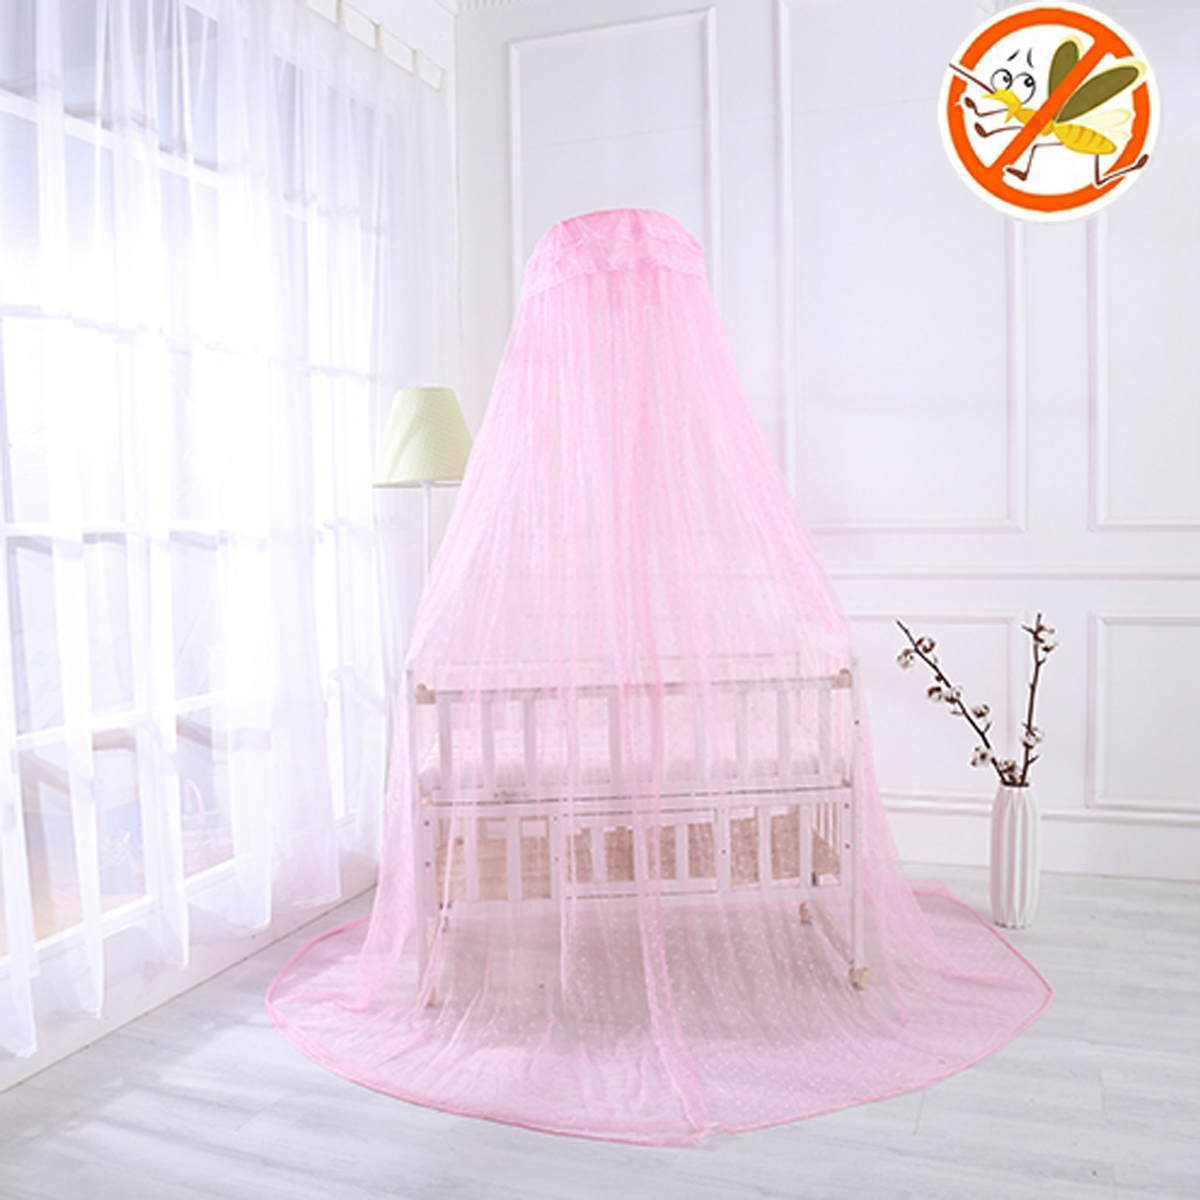 Kids-Baby-Bed-Canopy-Bedcover-Mosquito-Net-Curtain-Bedding-Cotton-Dome-Tent-1353509-11